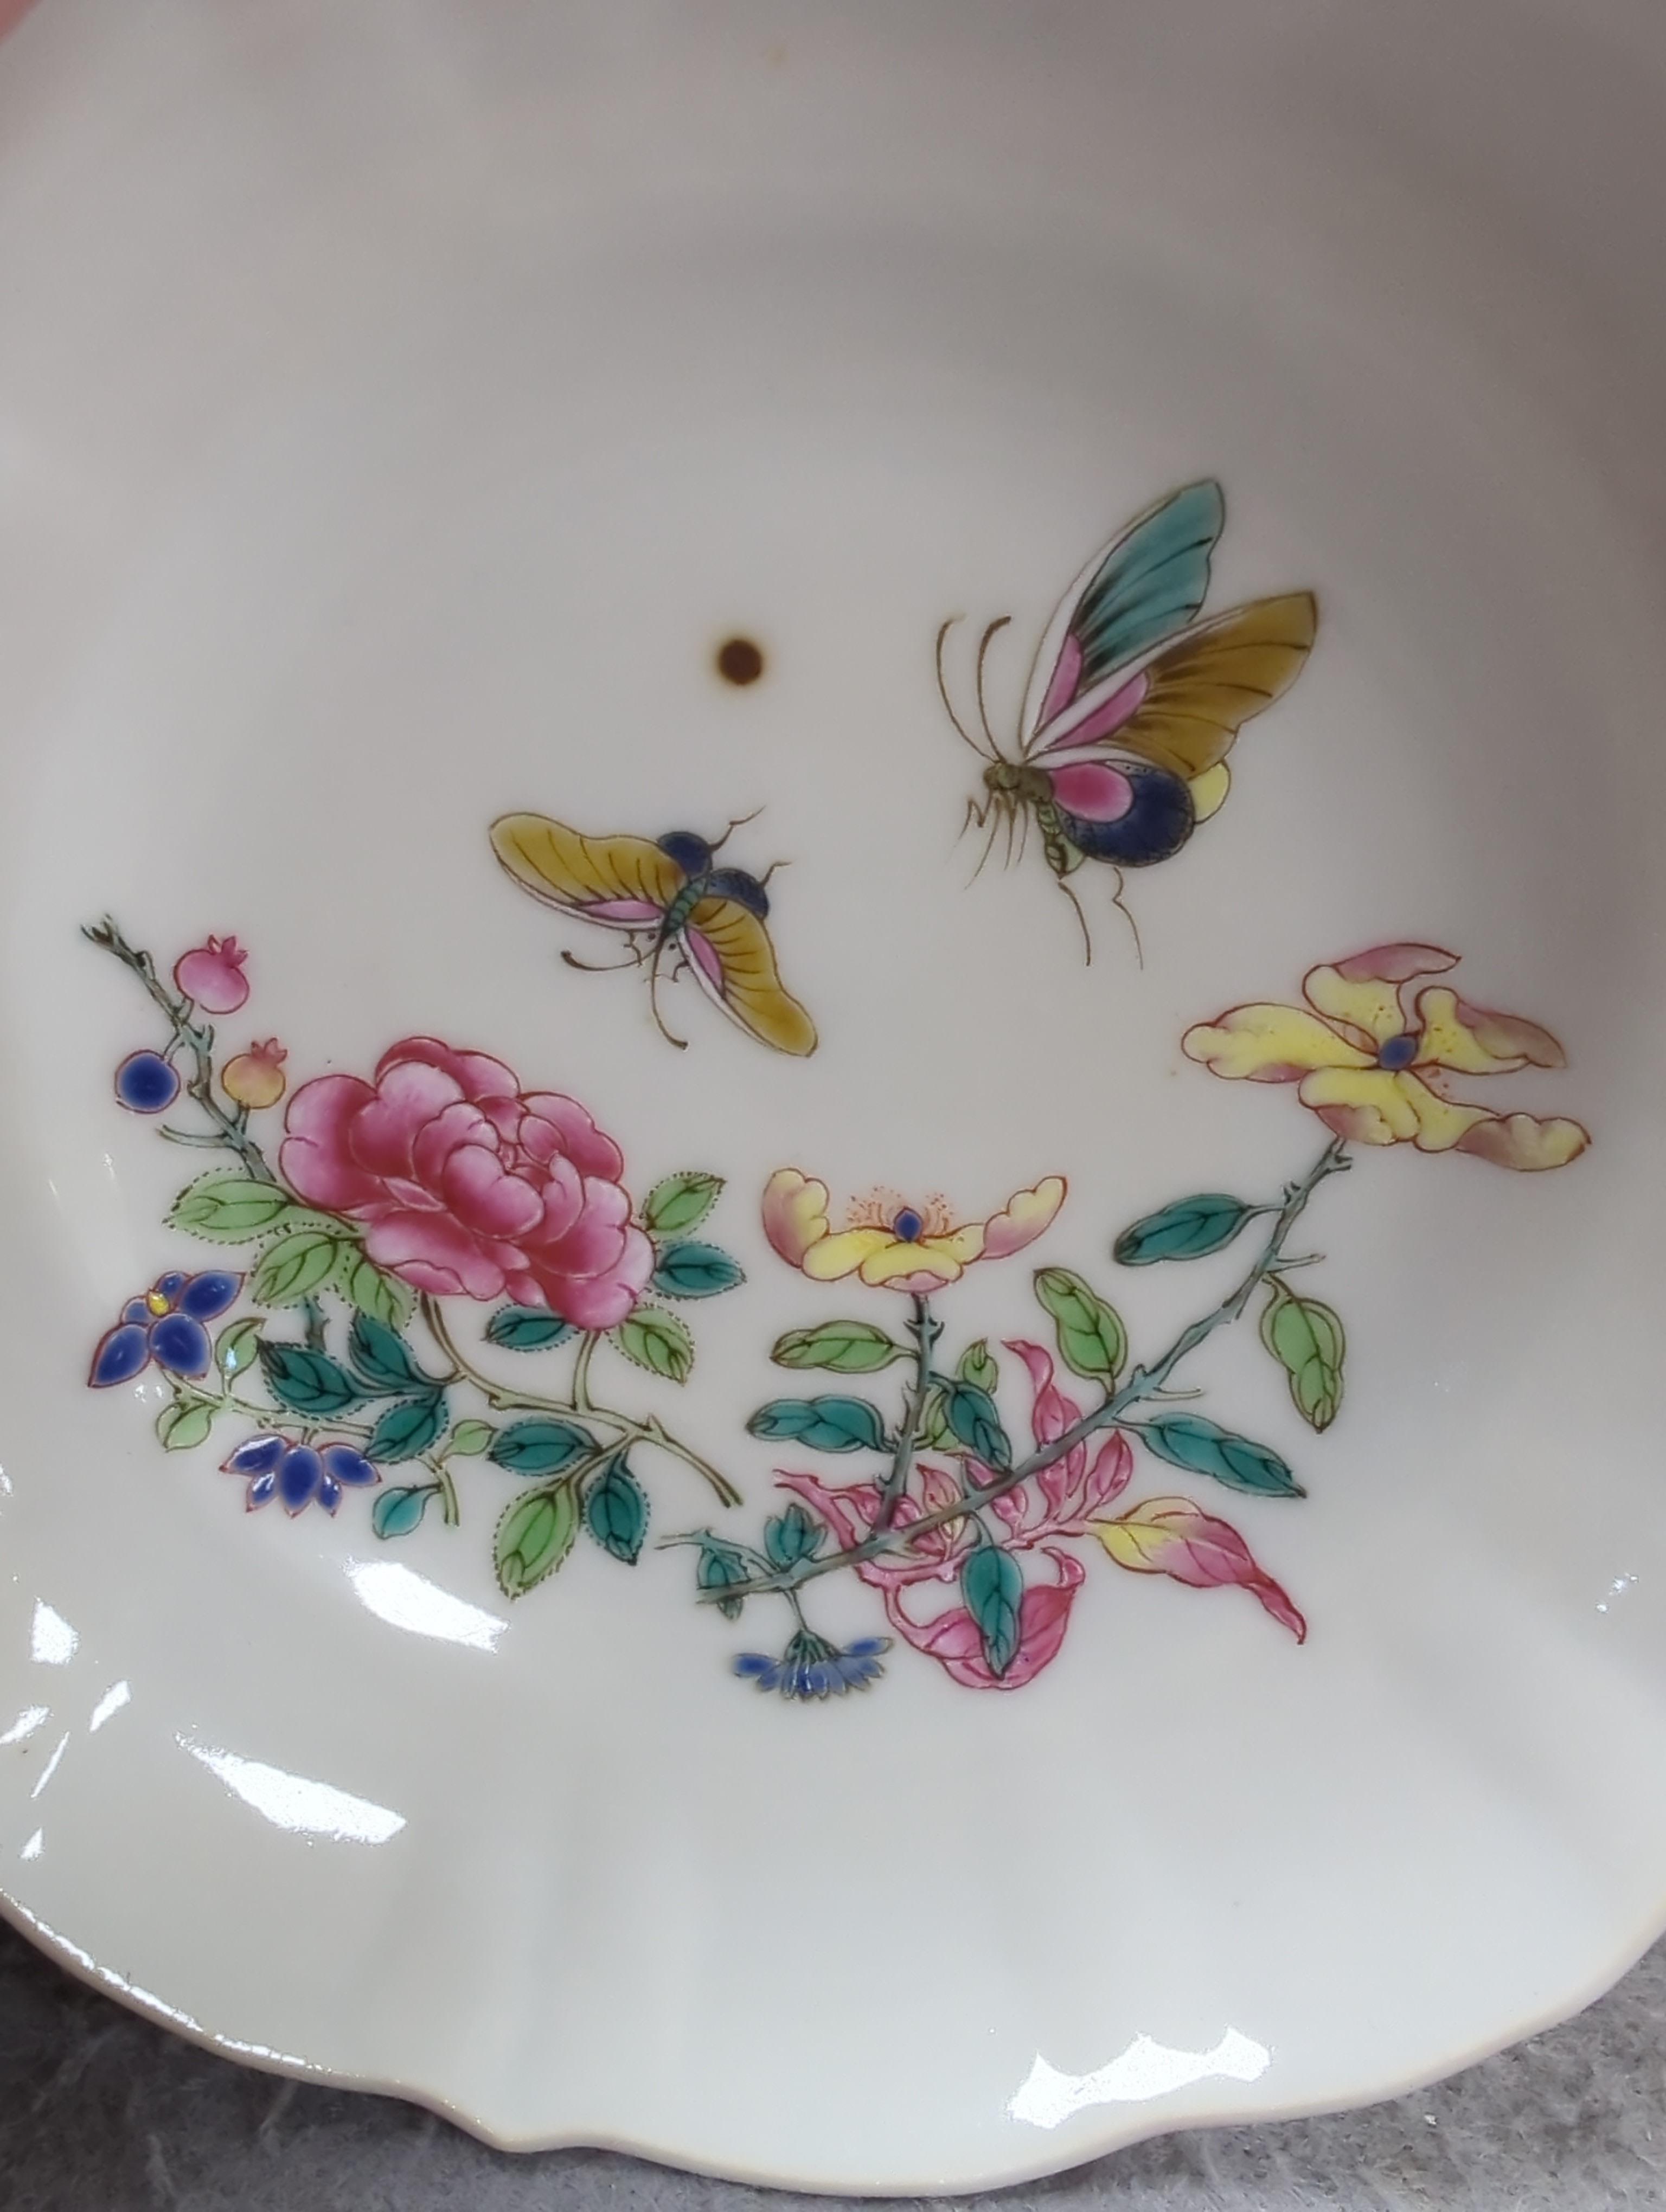 A pair of Chinese famille rose dishes, 12.5cm diameter